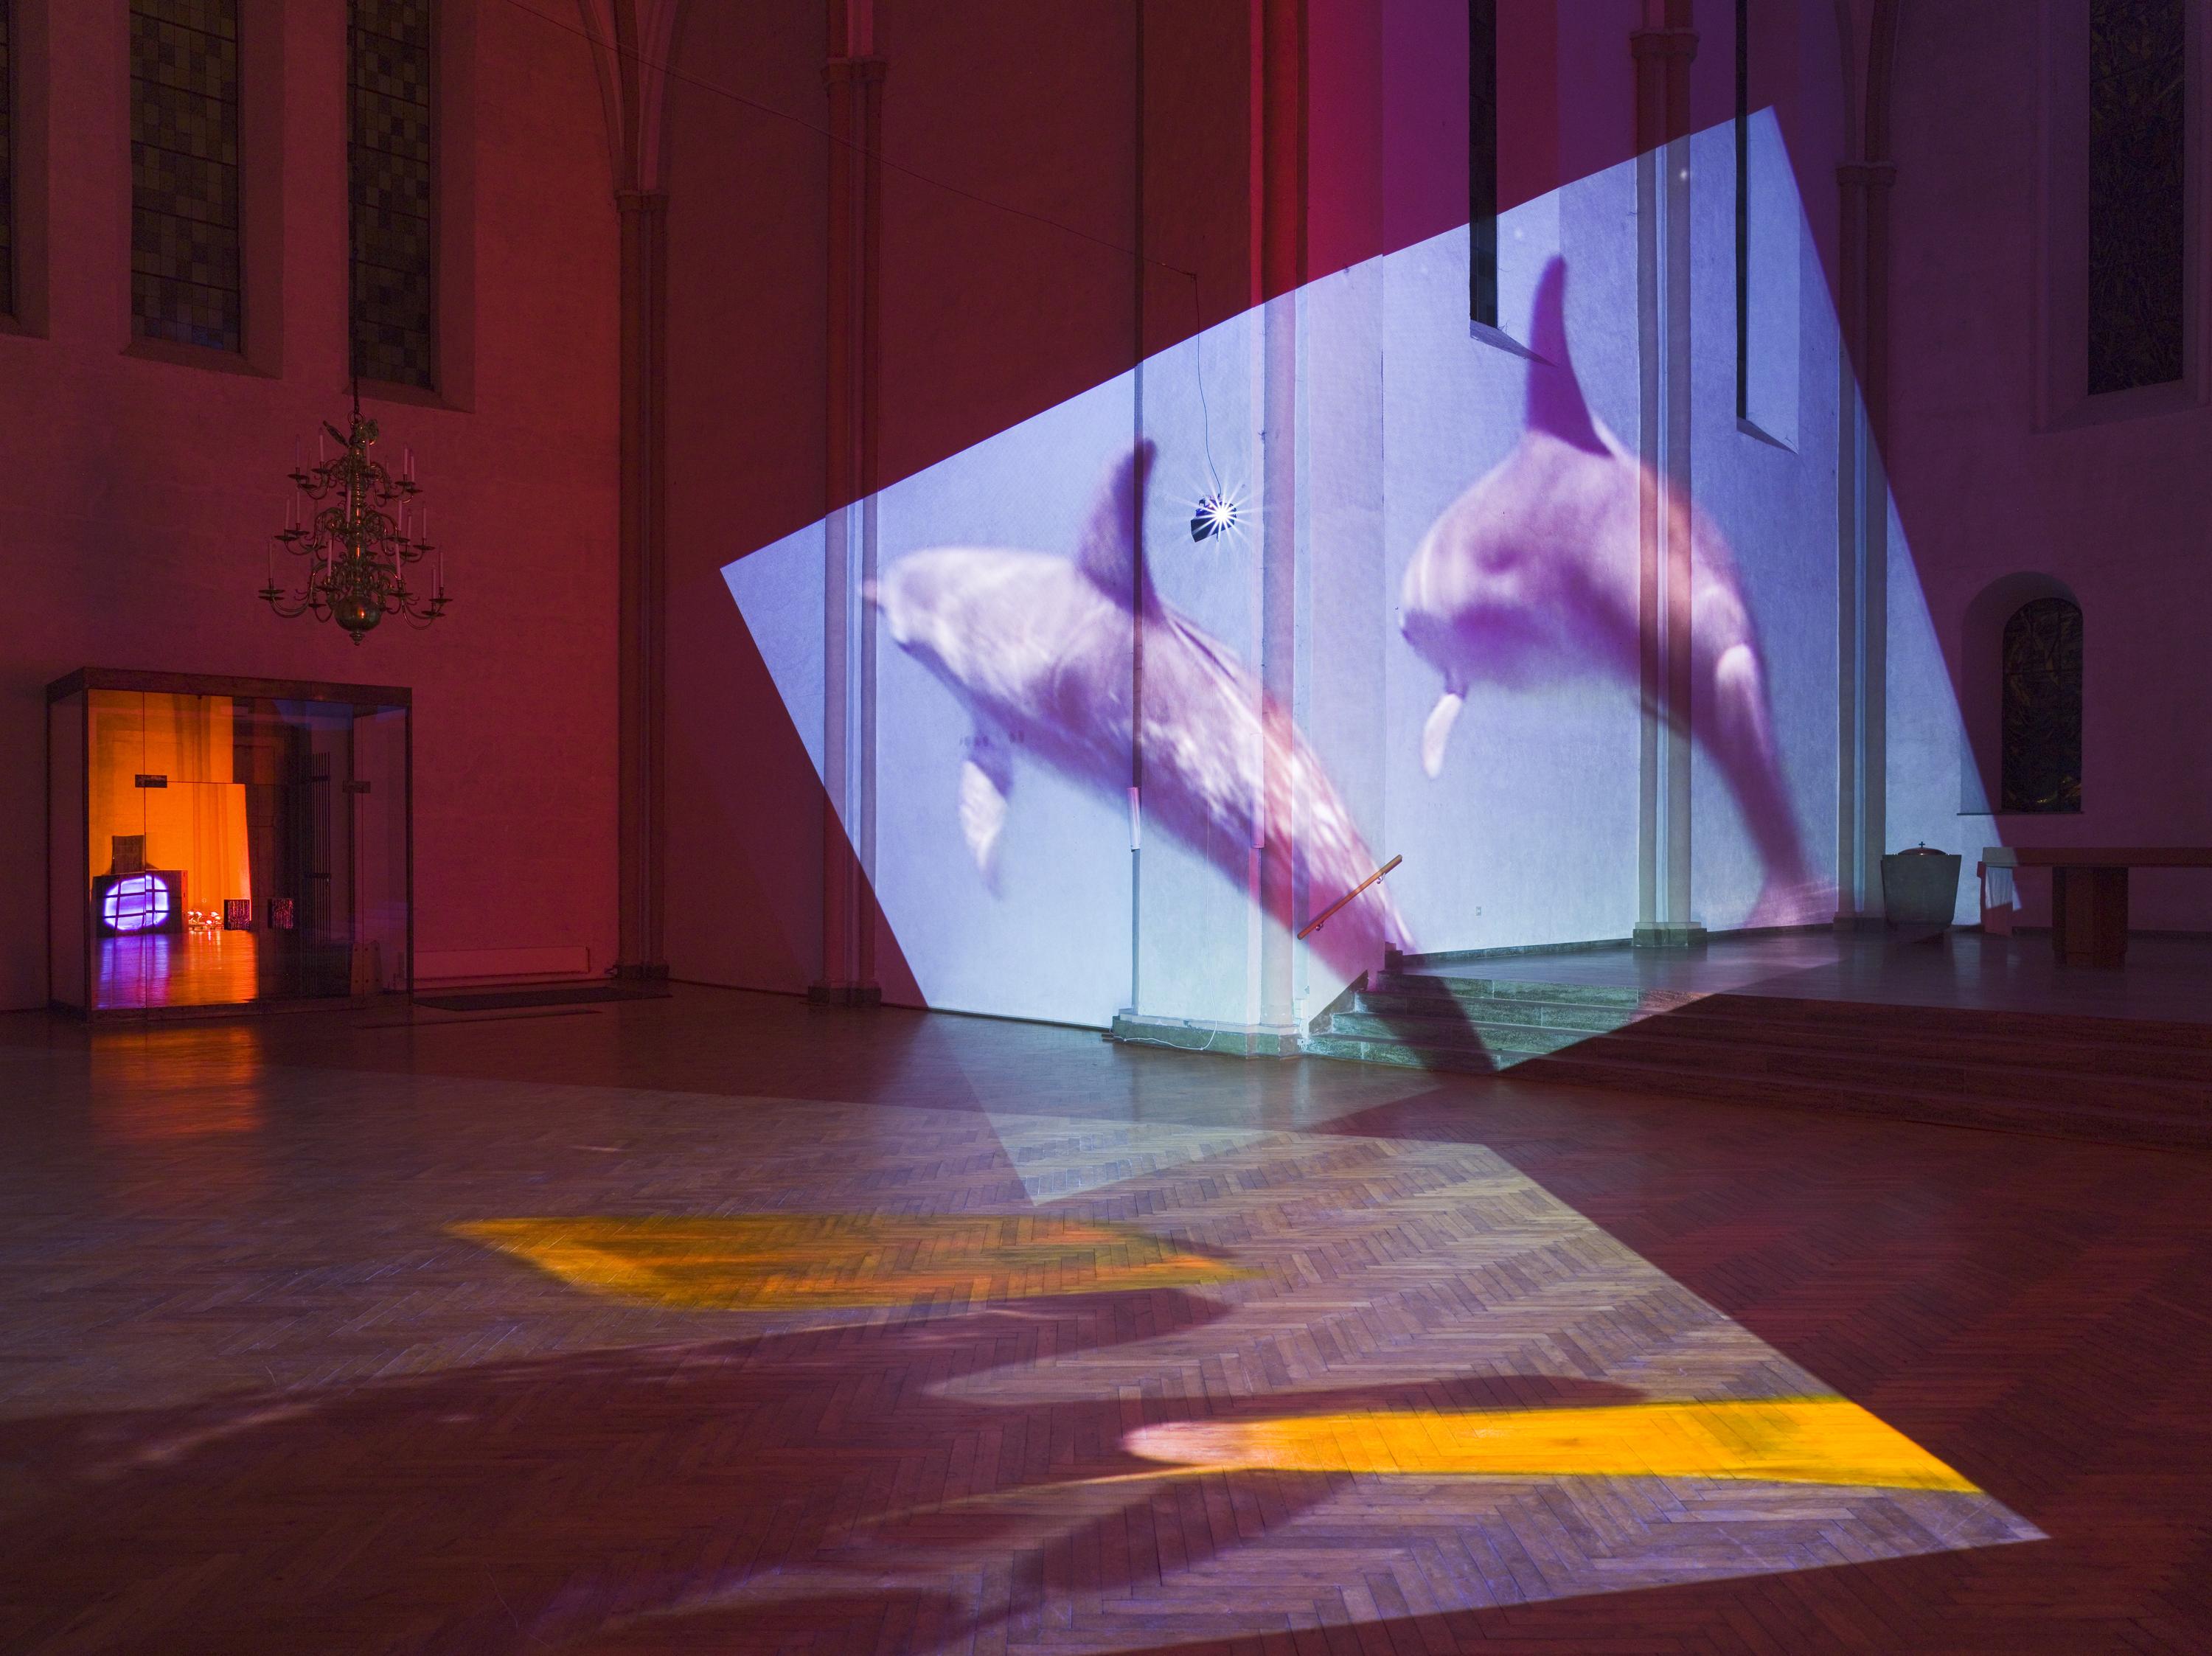 Two swimming dolphins are featured in a large, slanted video projected on the walls of a high-ceilinged room. The purplish dolphins appear in a blue rectangle, and stand out against the magenta-colored walls and floor.